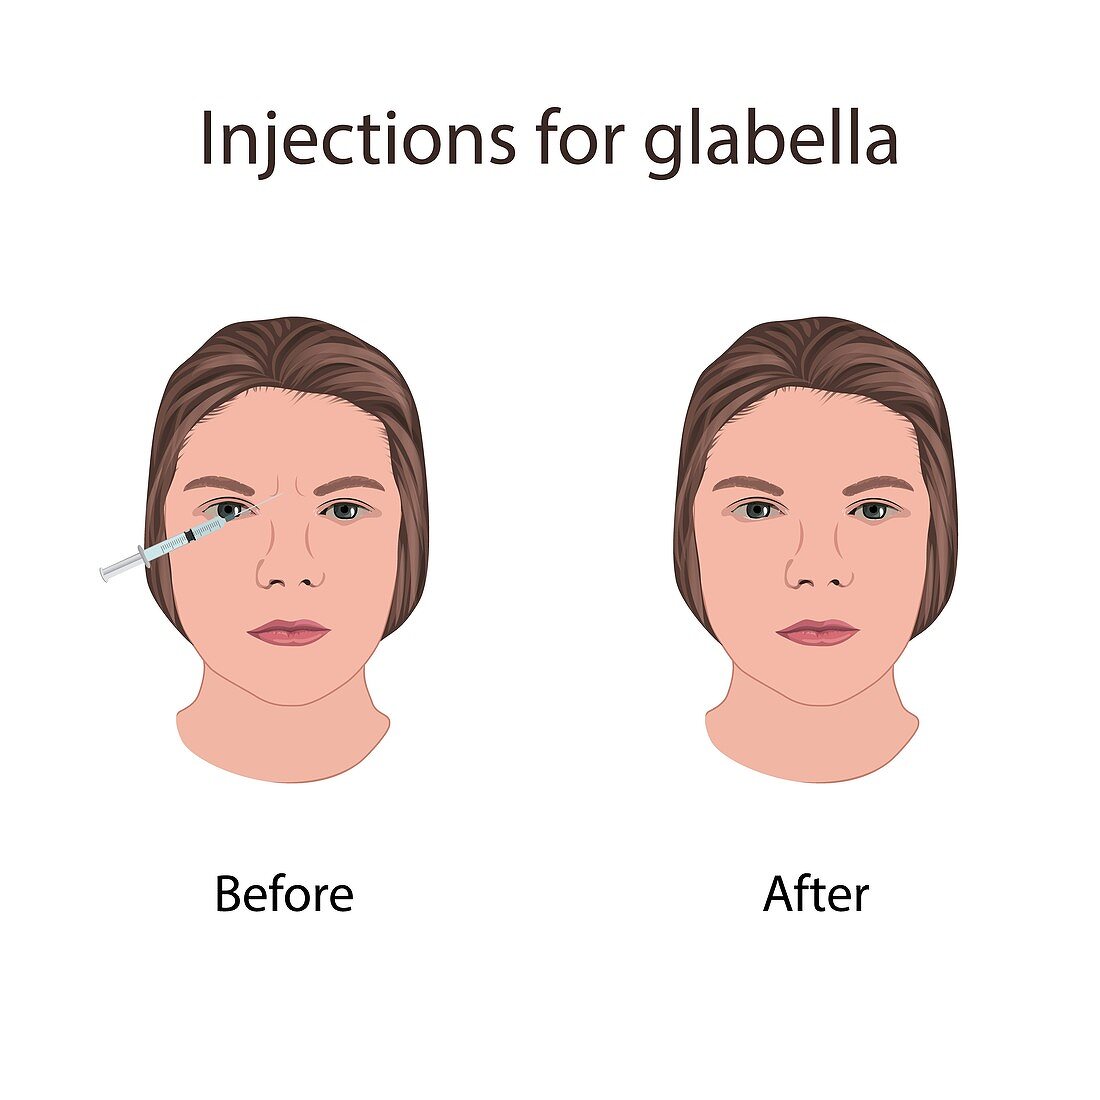 Injections for glabella, illustration